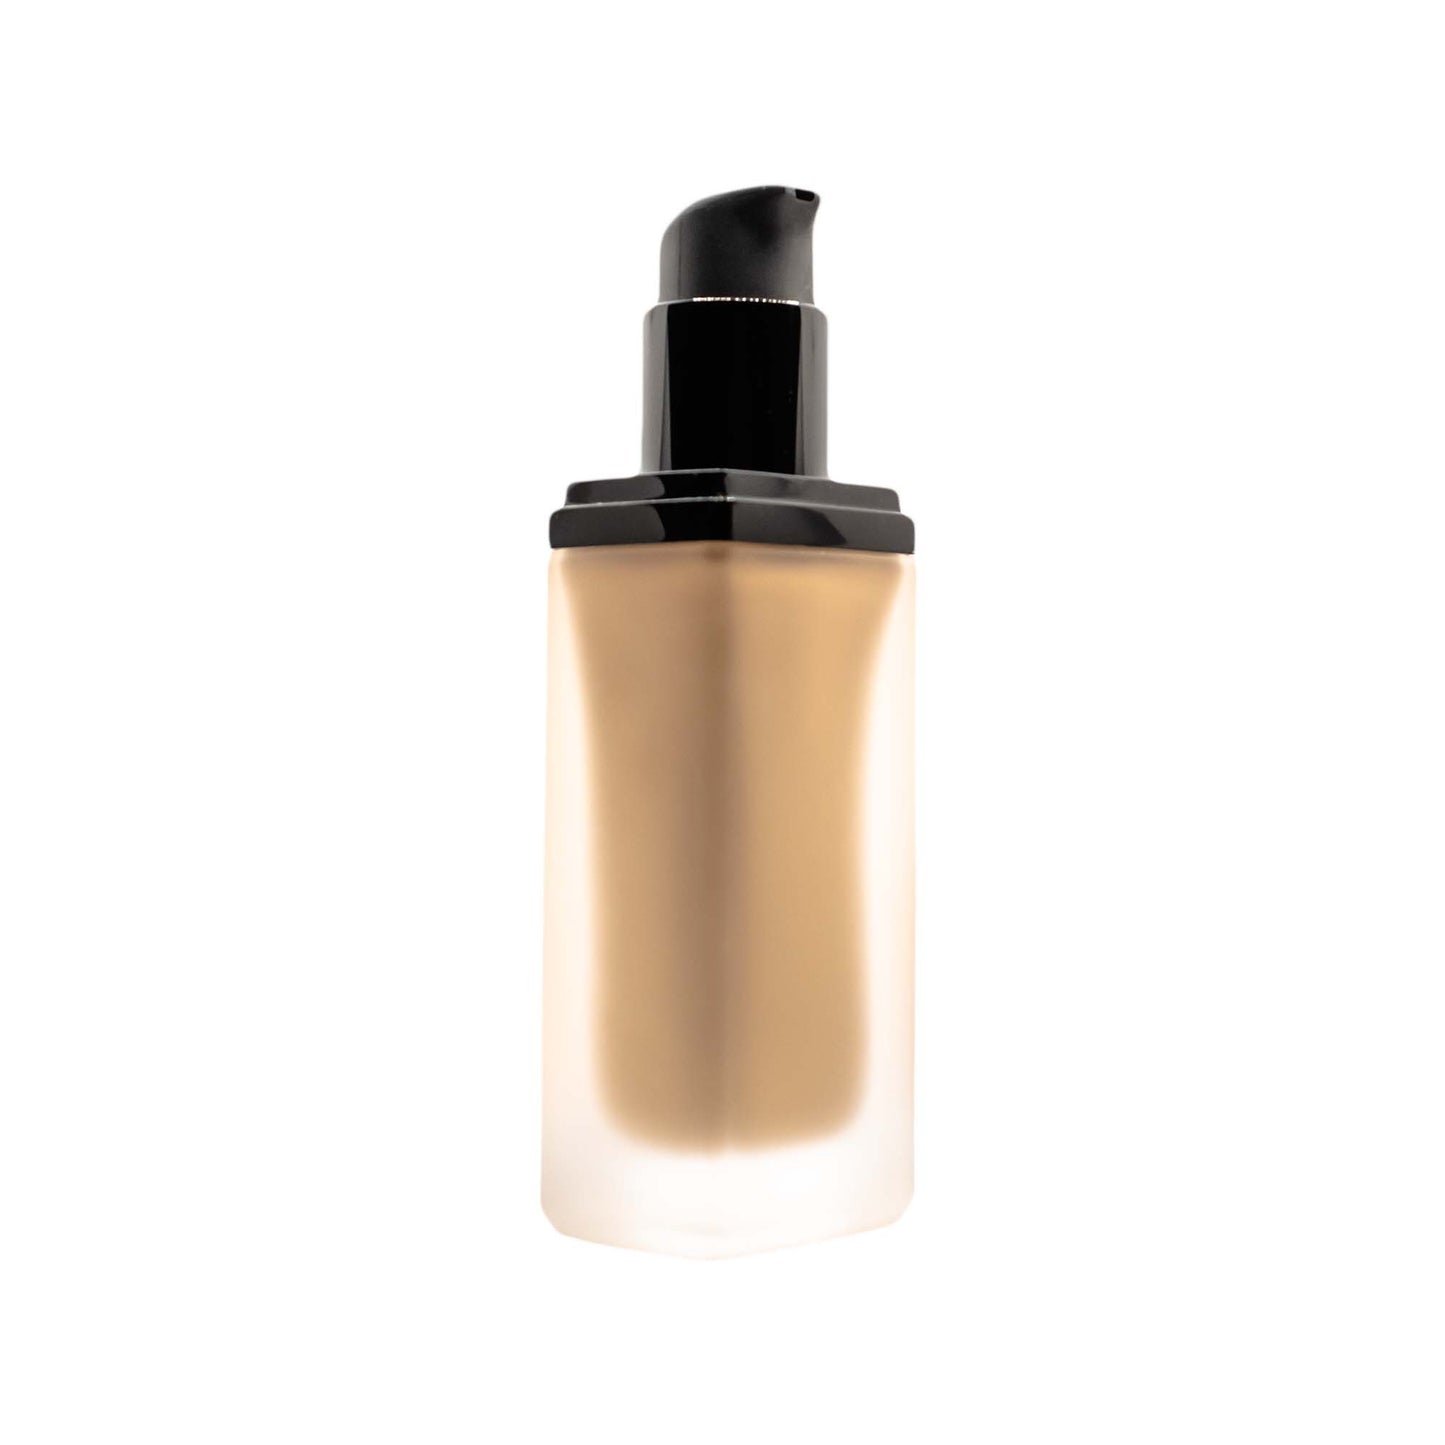 Get flawless skin with Cruisin Organics Warm Nude Foundation SPF 15. This vegan, oil-free, and paraben-free formula is picture-book for both men and women.